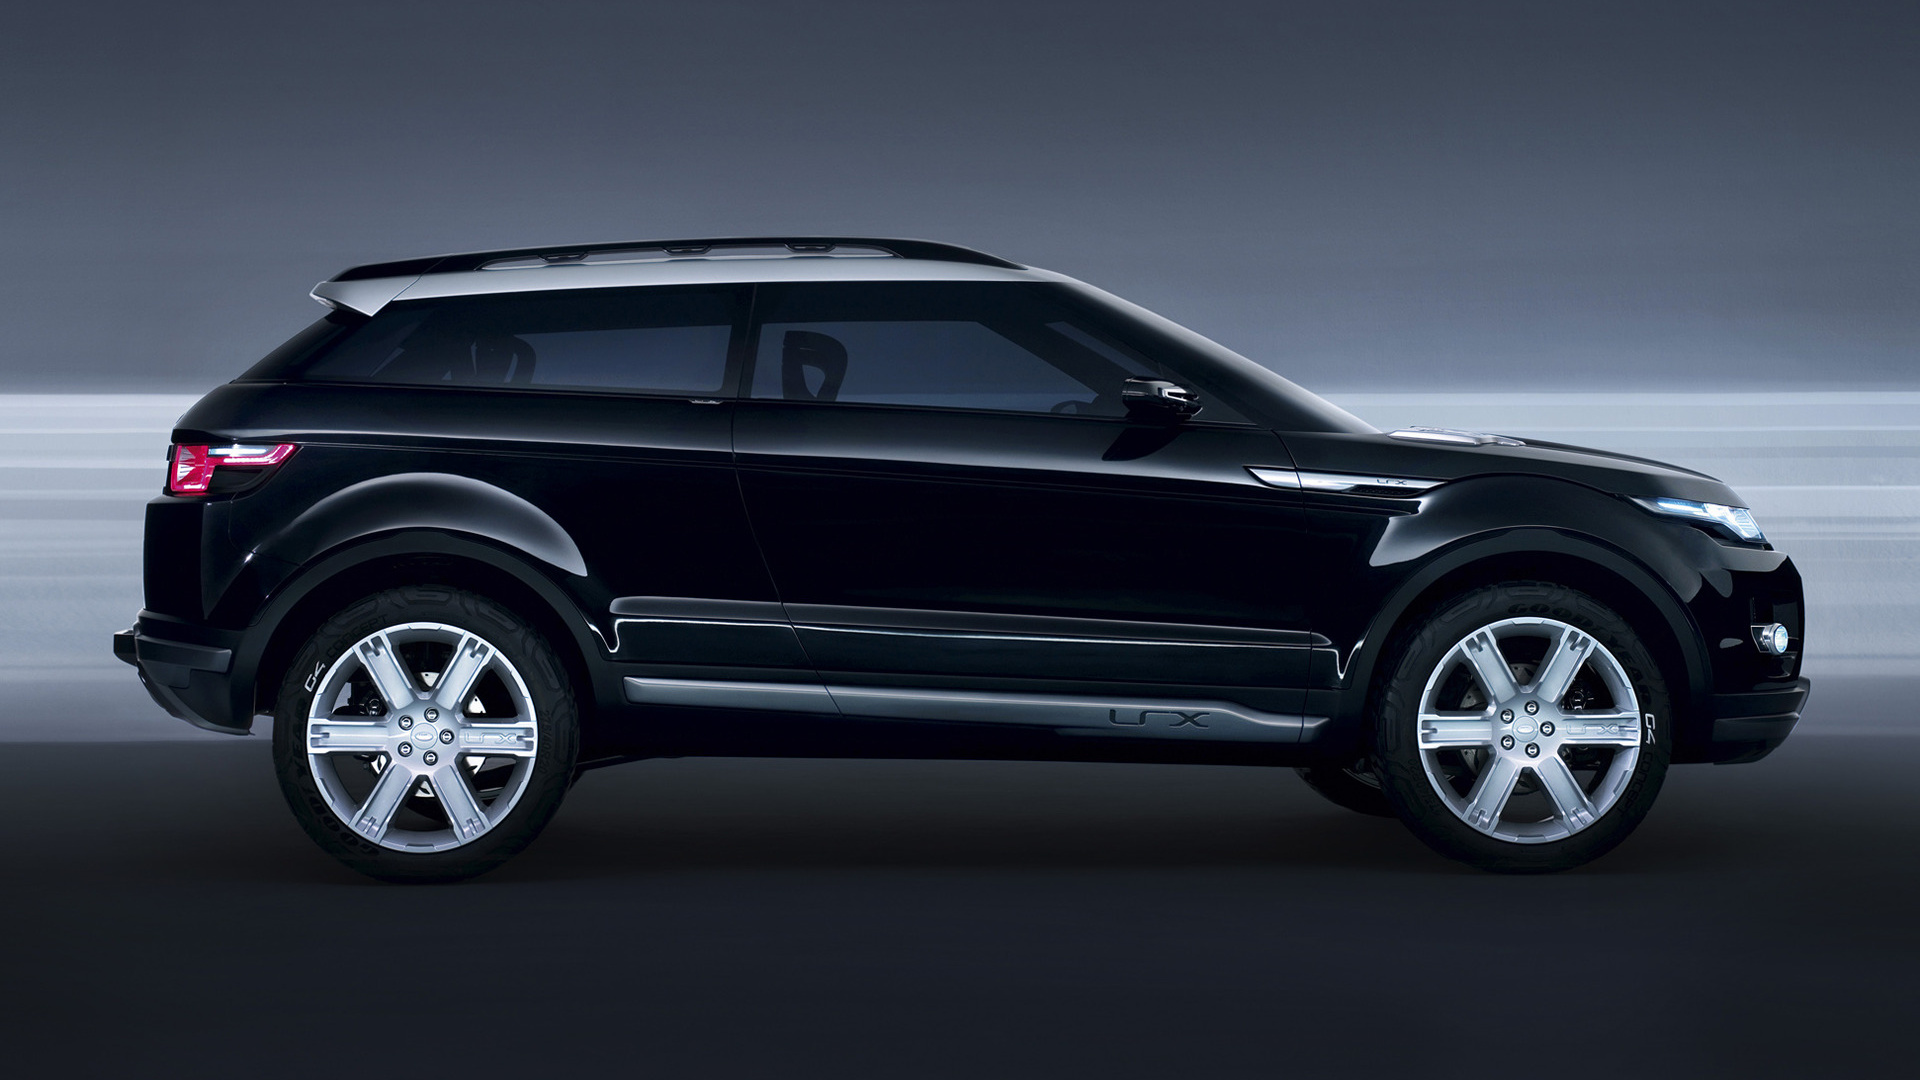 2008 Land Rover LRX Concept Black Wallpapers and HD